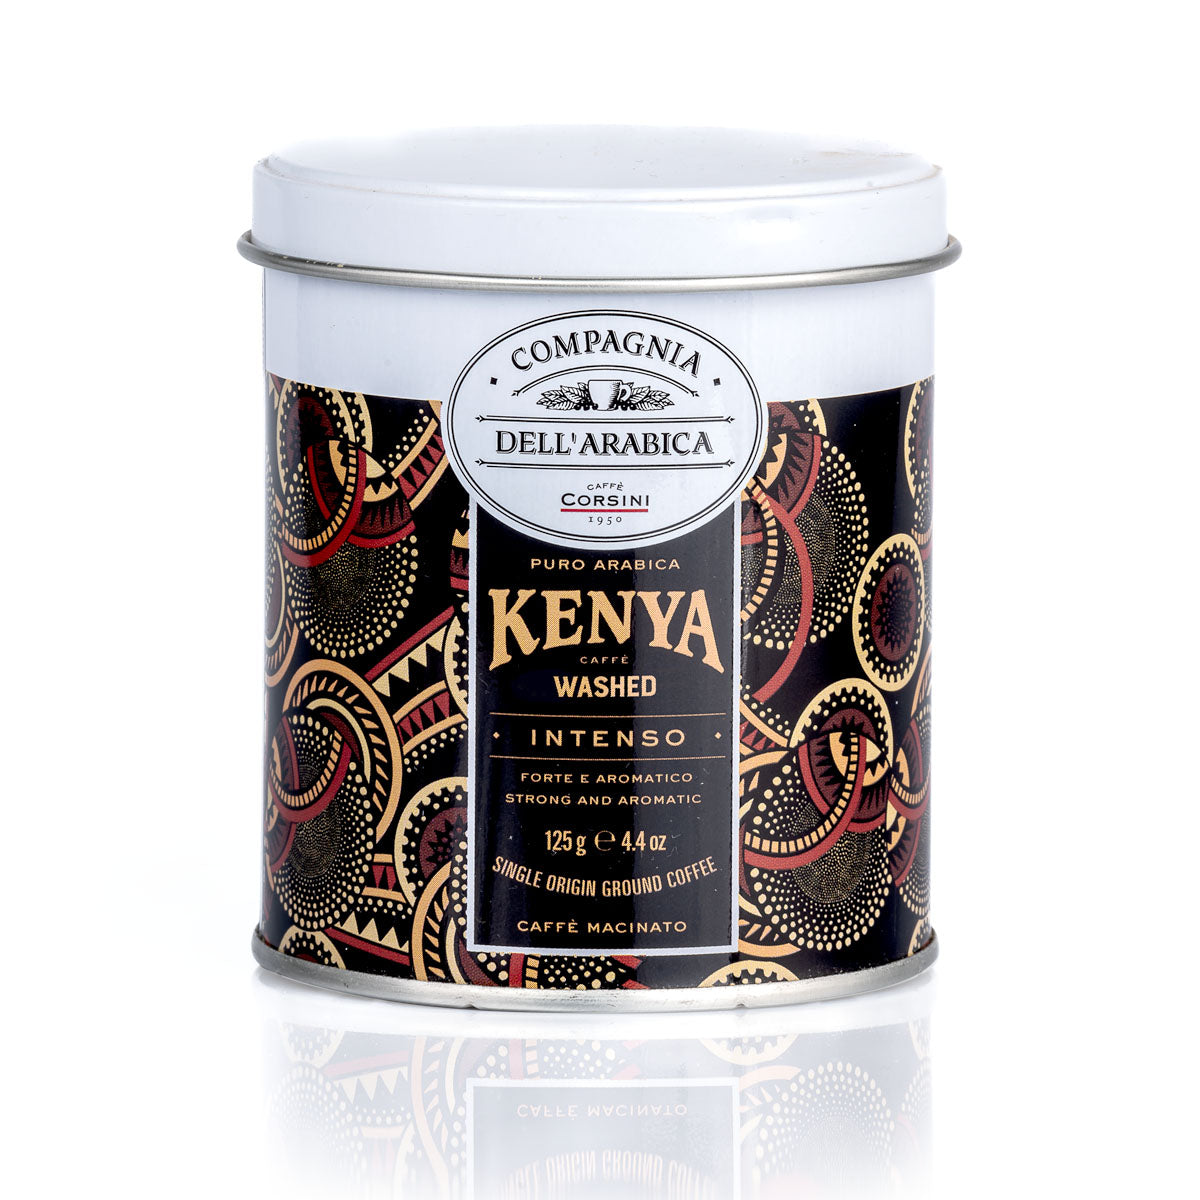 Ground coffee | Kenya Washed | 100% Arabica | Can of 125g | Box of 10 cans